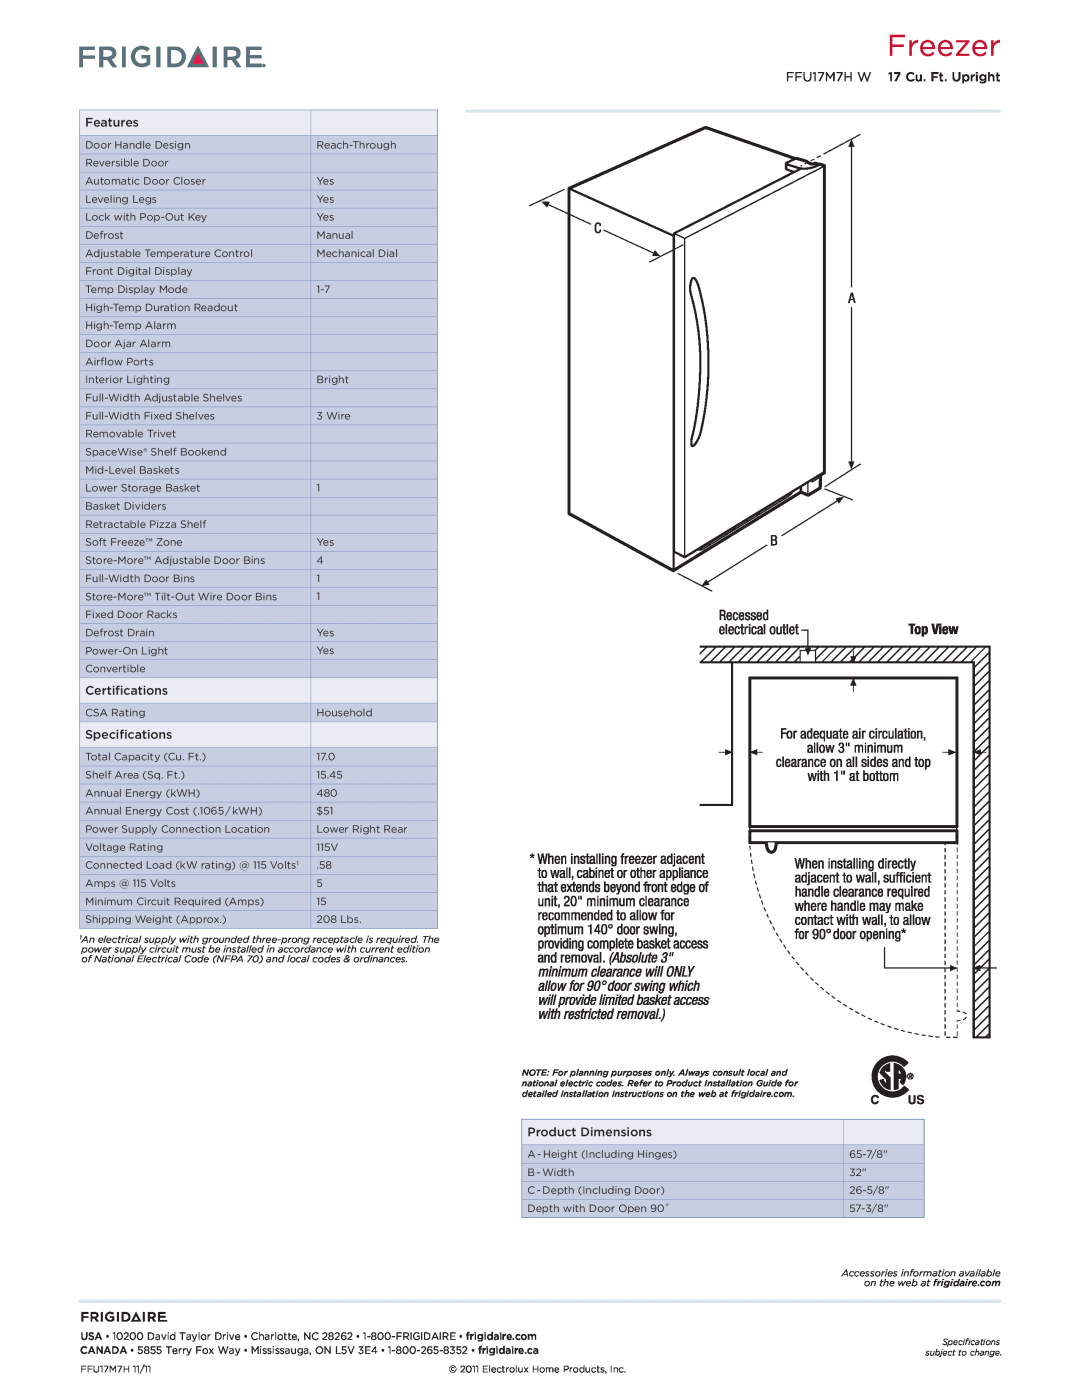 Frigidaire FFU17M7H W dimensions Freezer, Features, Certifications, Specifications, Product Dimensions 